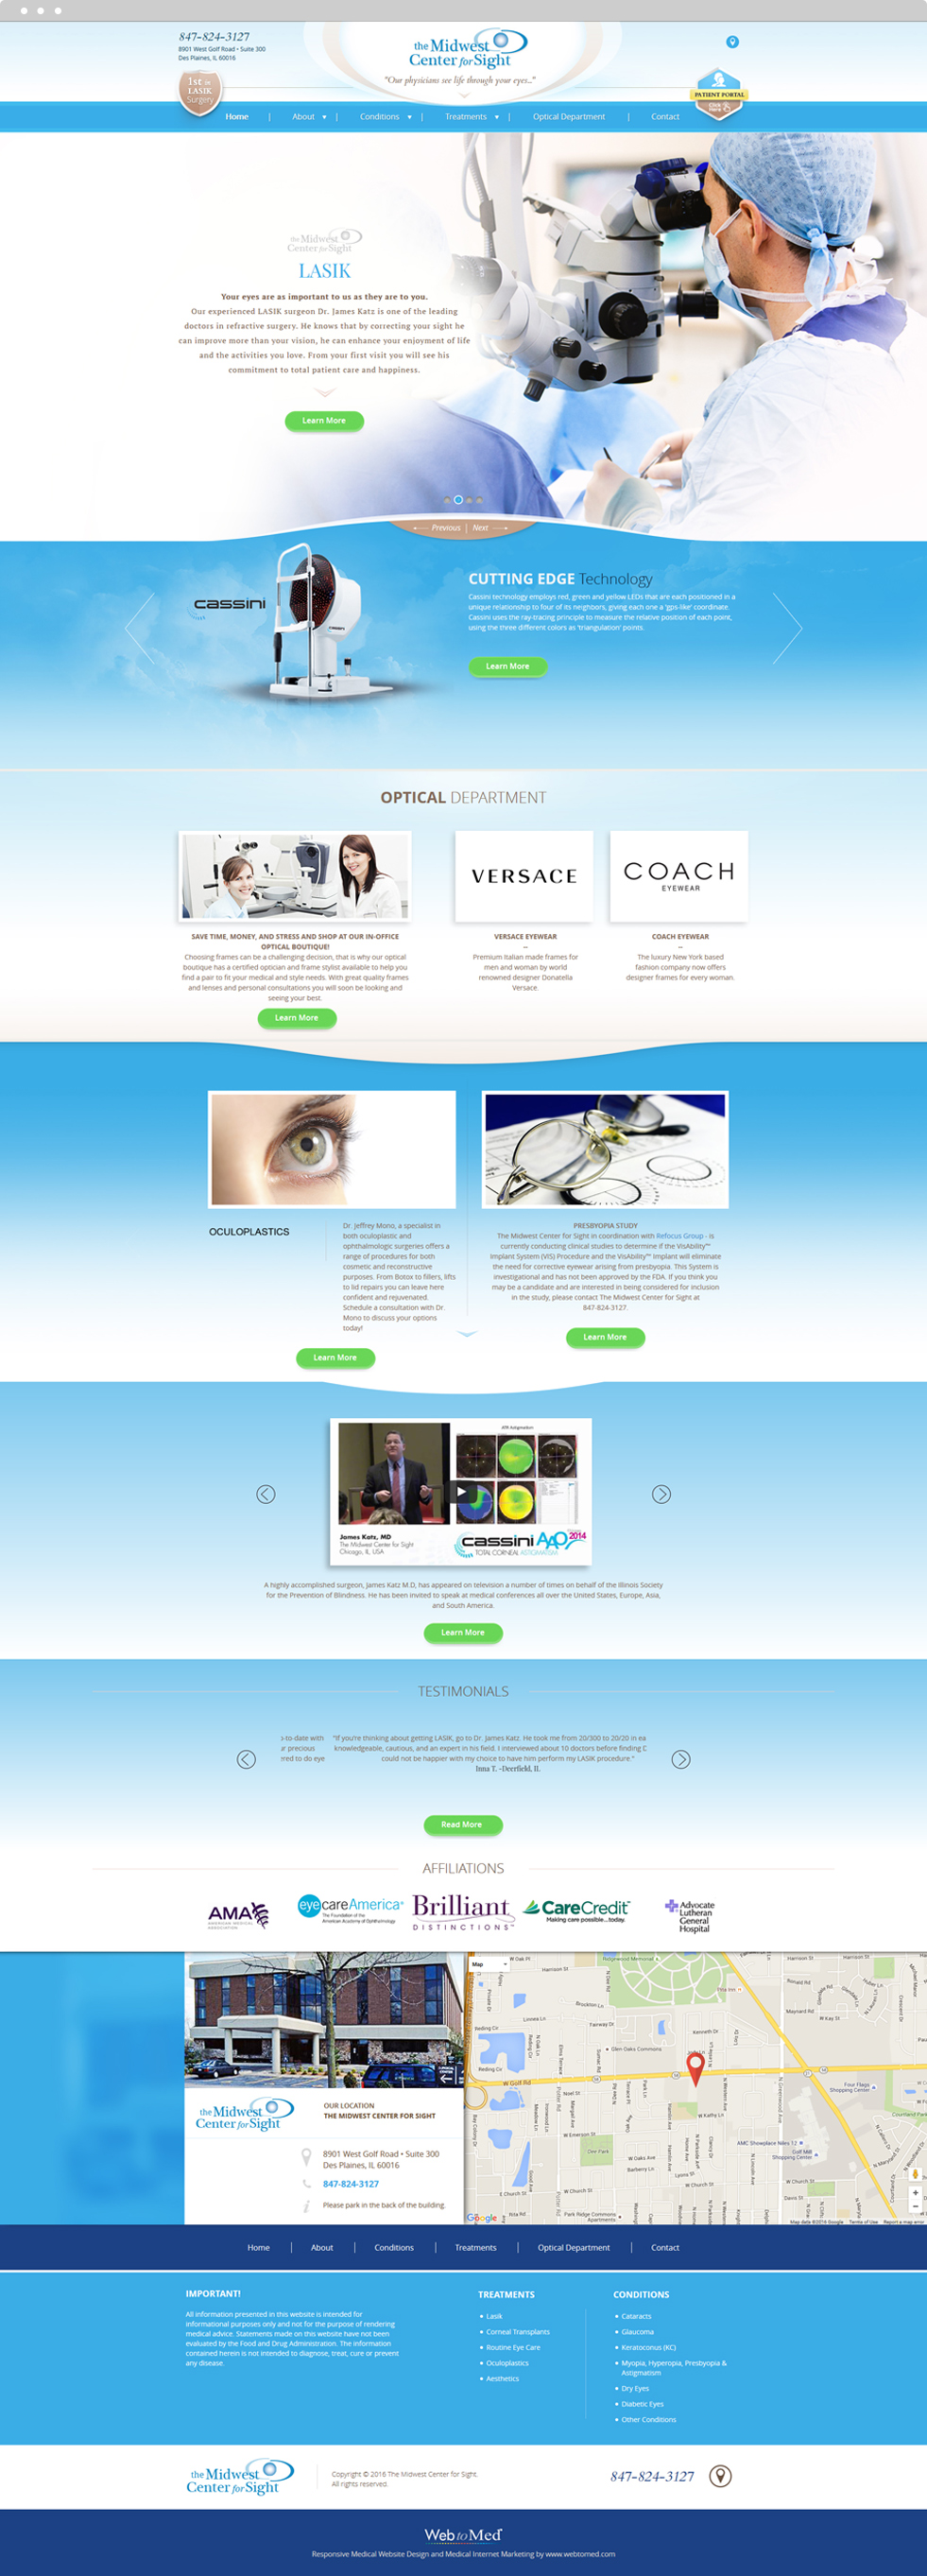 Ophthalmology Website Design - The Midwest Center for Sight - Homepage